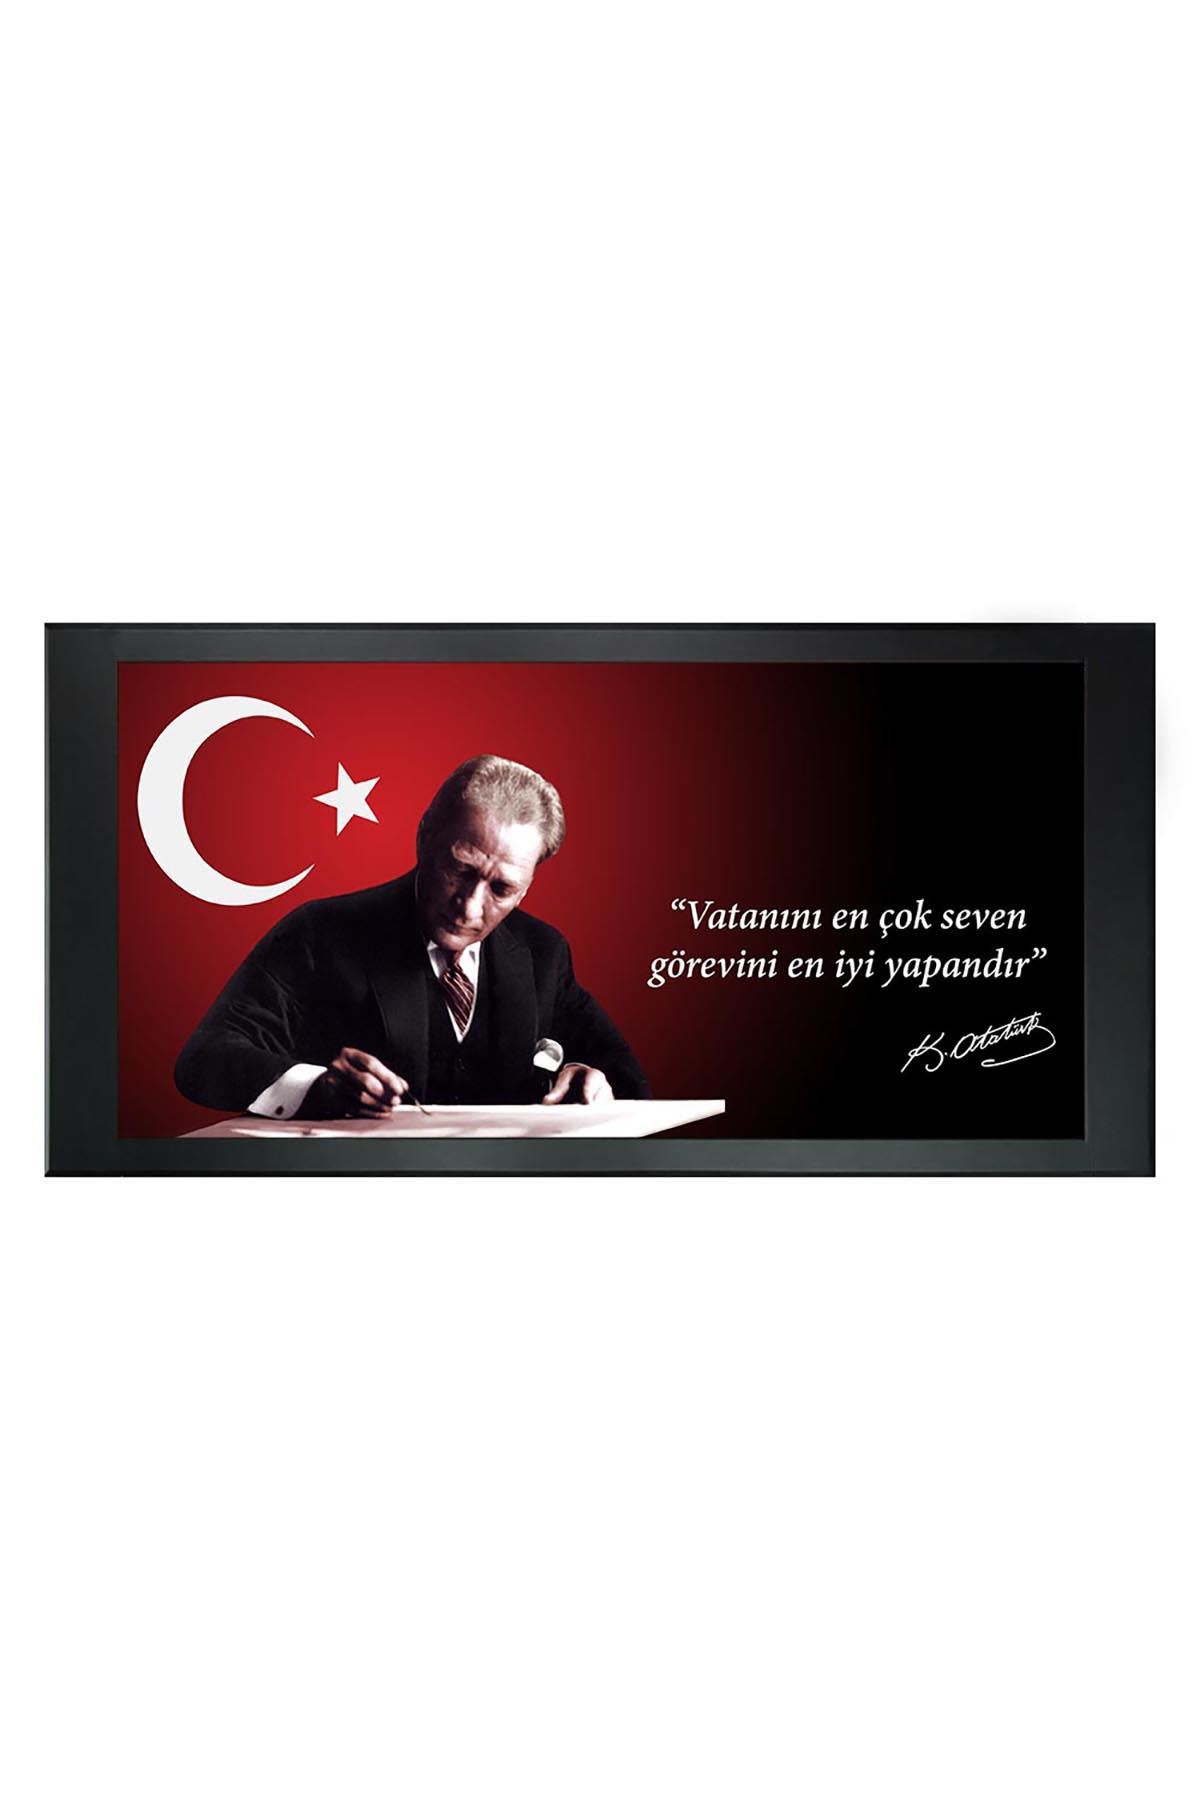 M. Kemal Atatürk Printed Manager Board | Printed Manager Board | Leather Framed Board | High Quality Manager Board